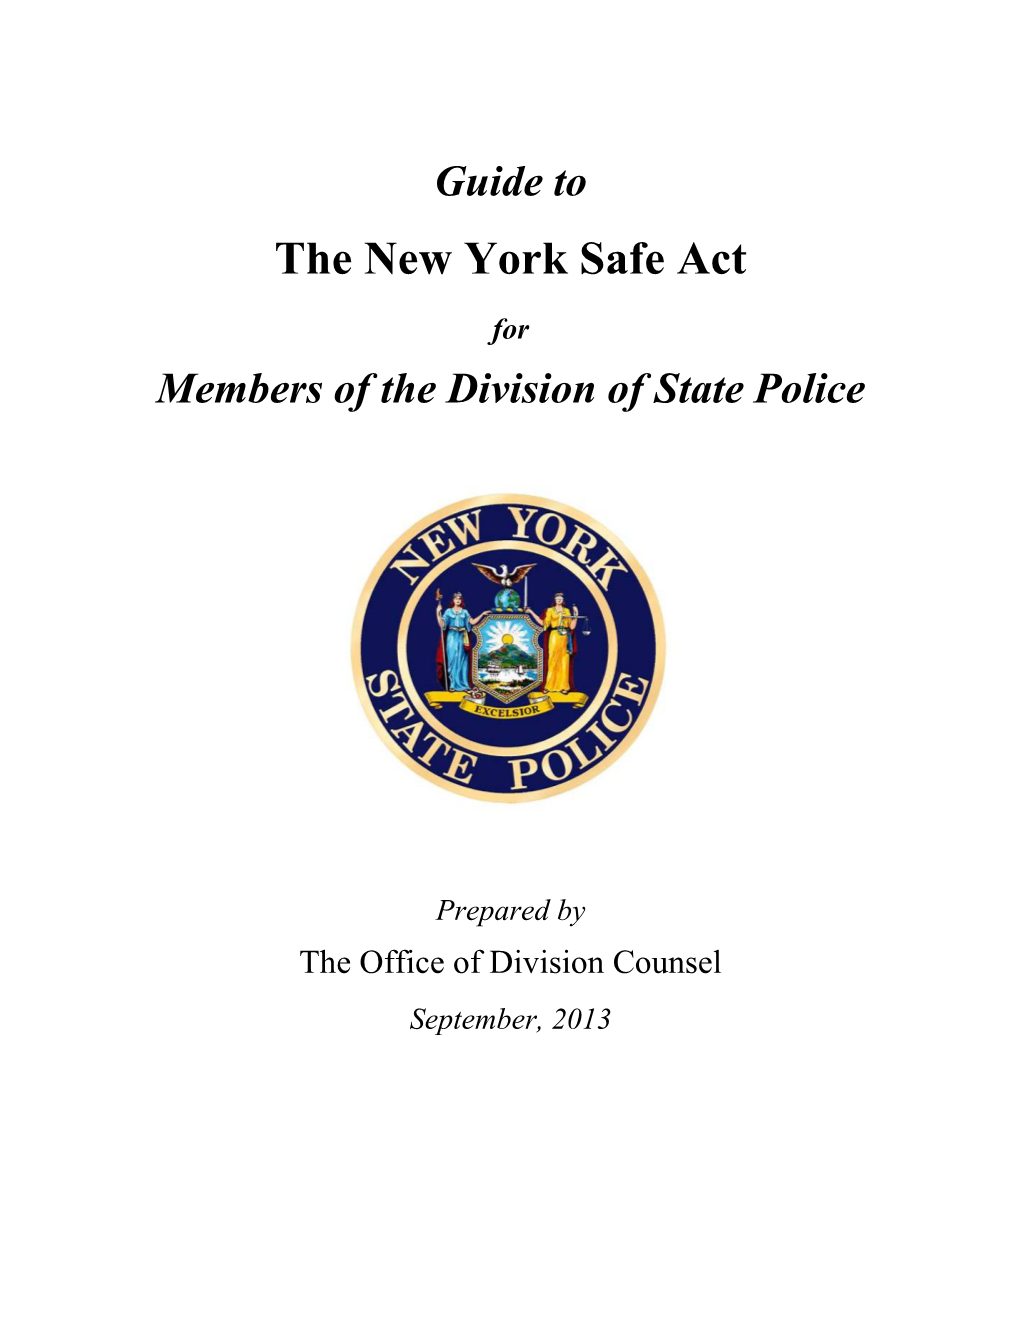 Guide to the New York Safe Act for Members of the Division of State Police